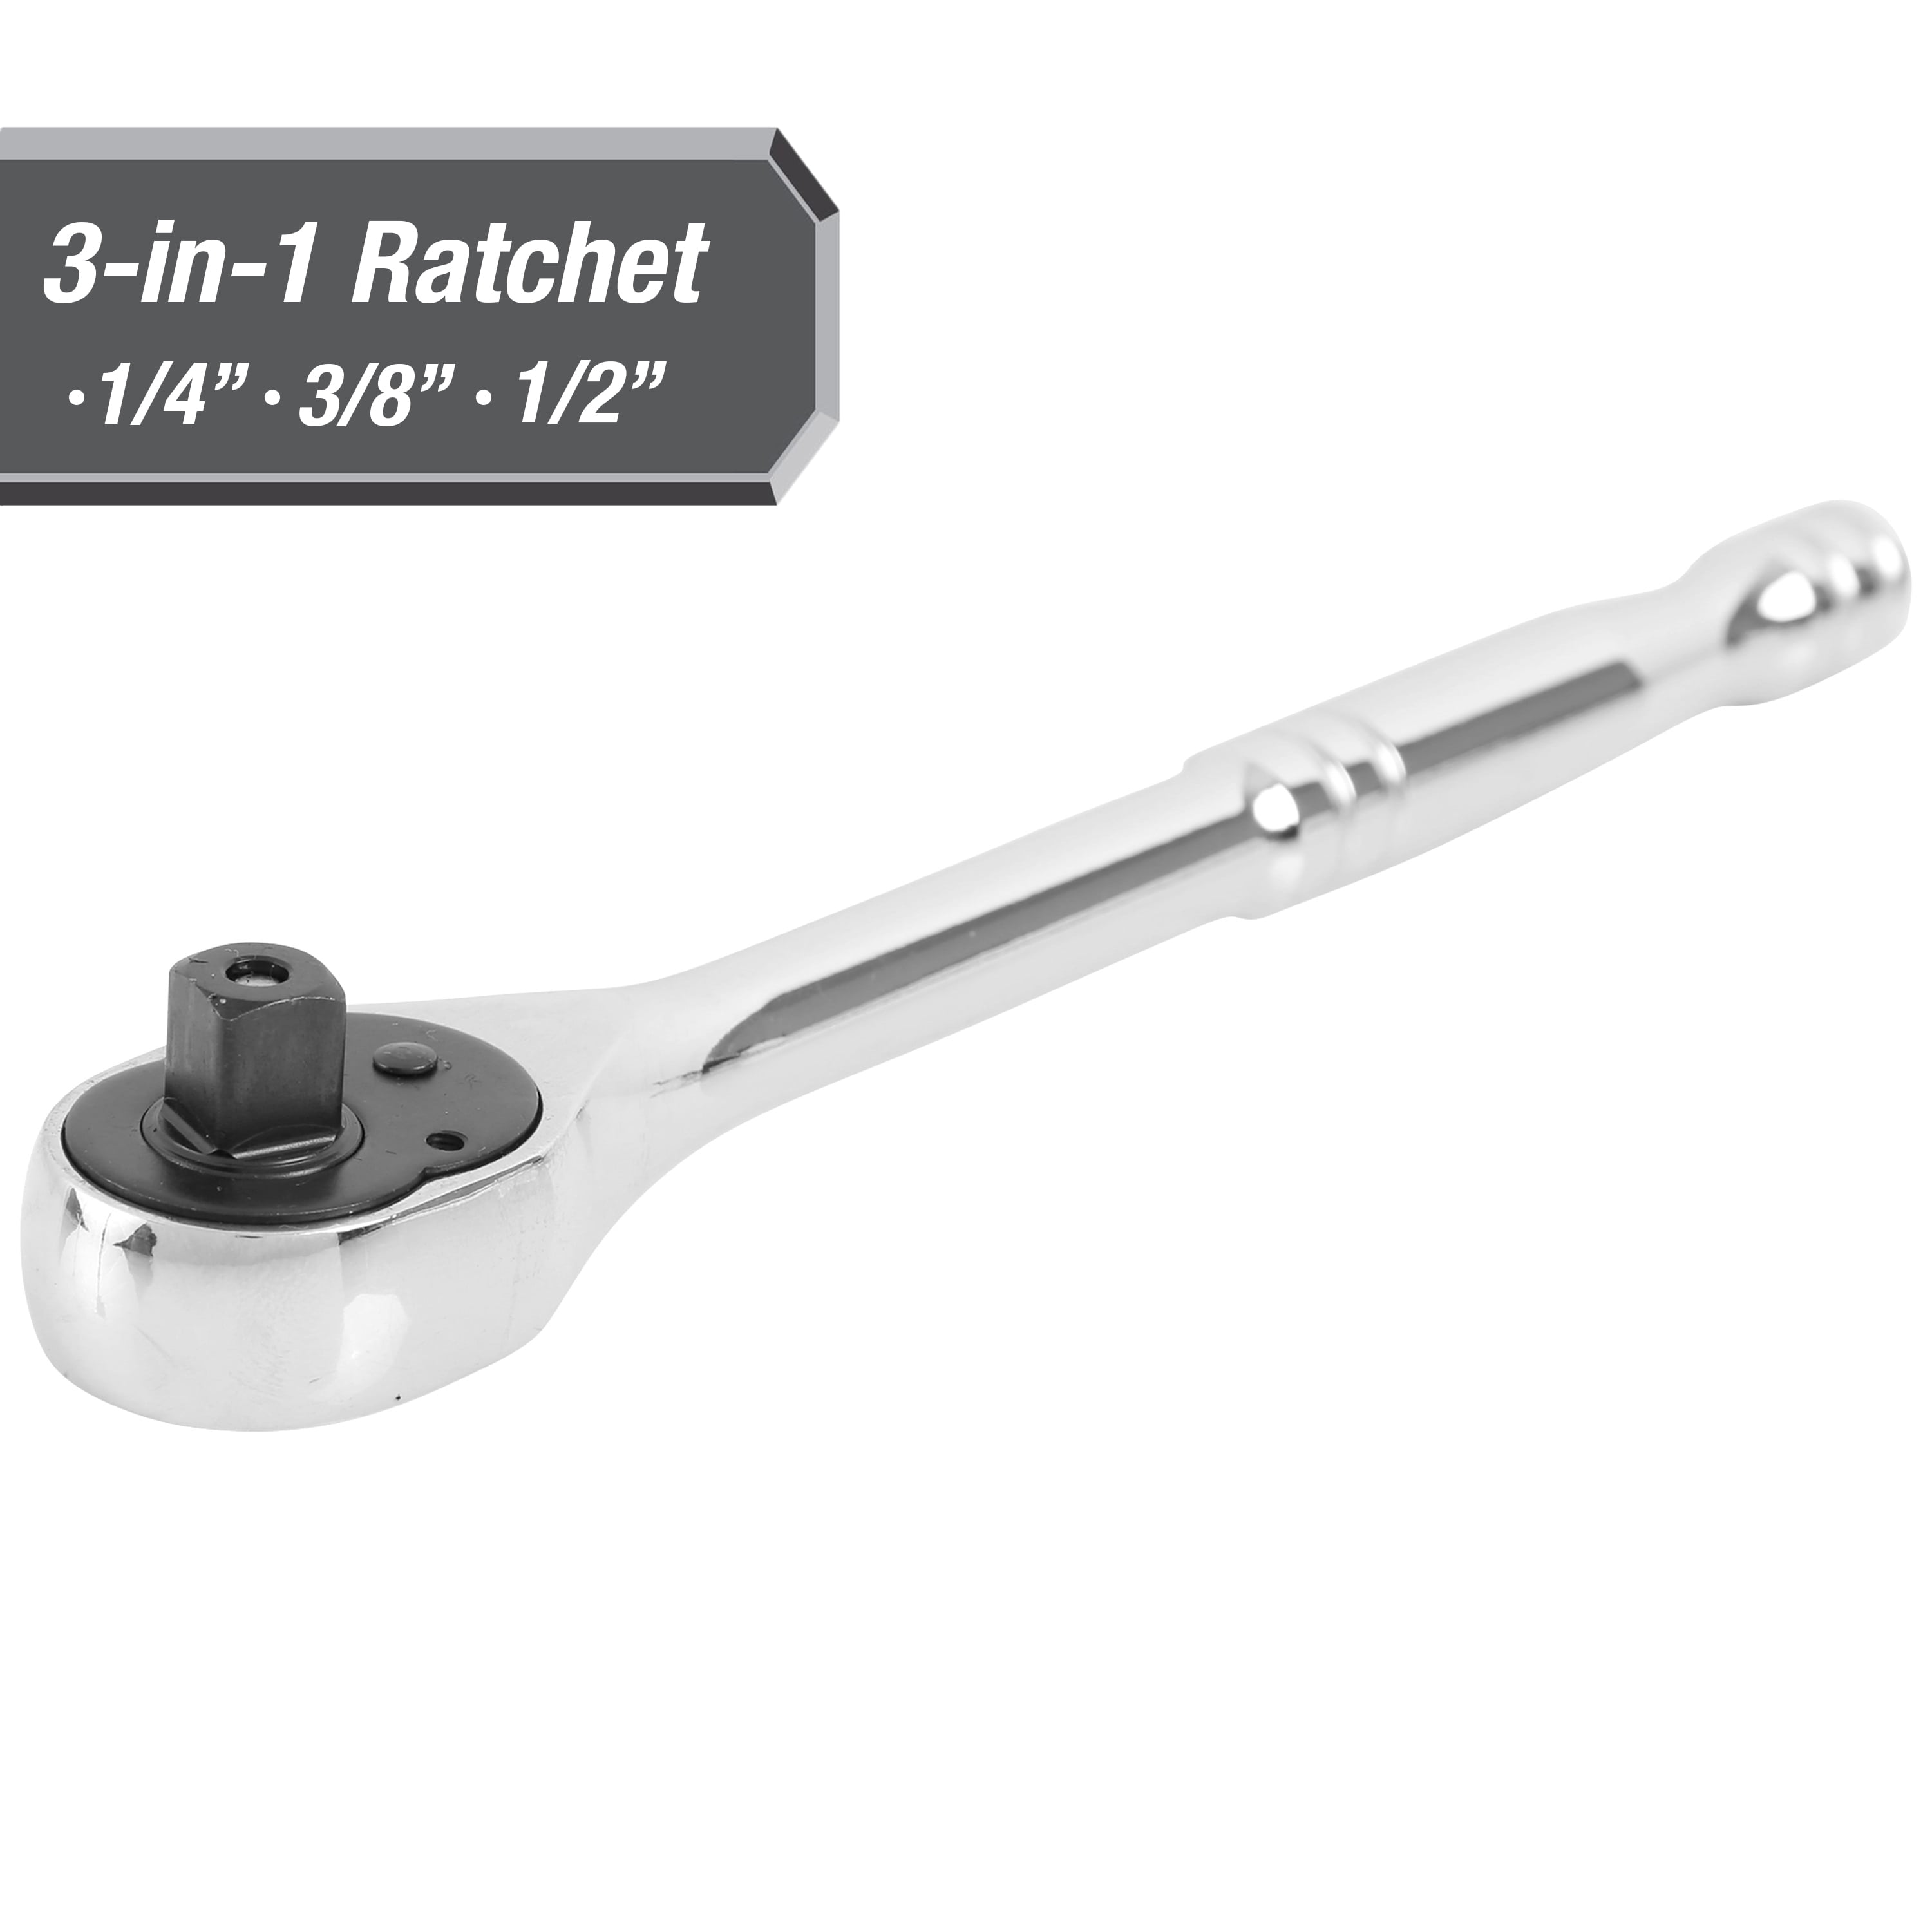 1/4" Automatic Ratchet Wrench Extendable Long Handle Socket  Steel Tool G4J3